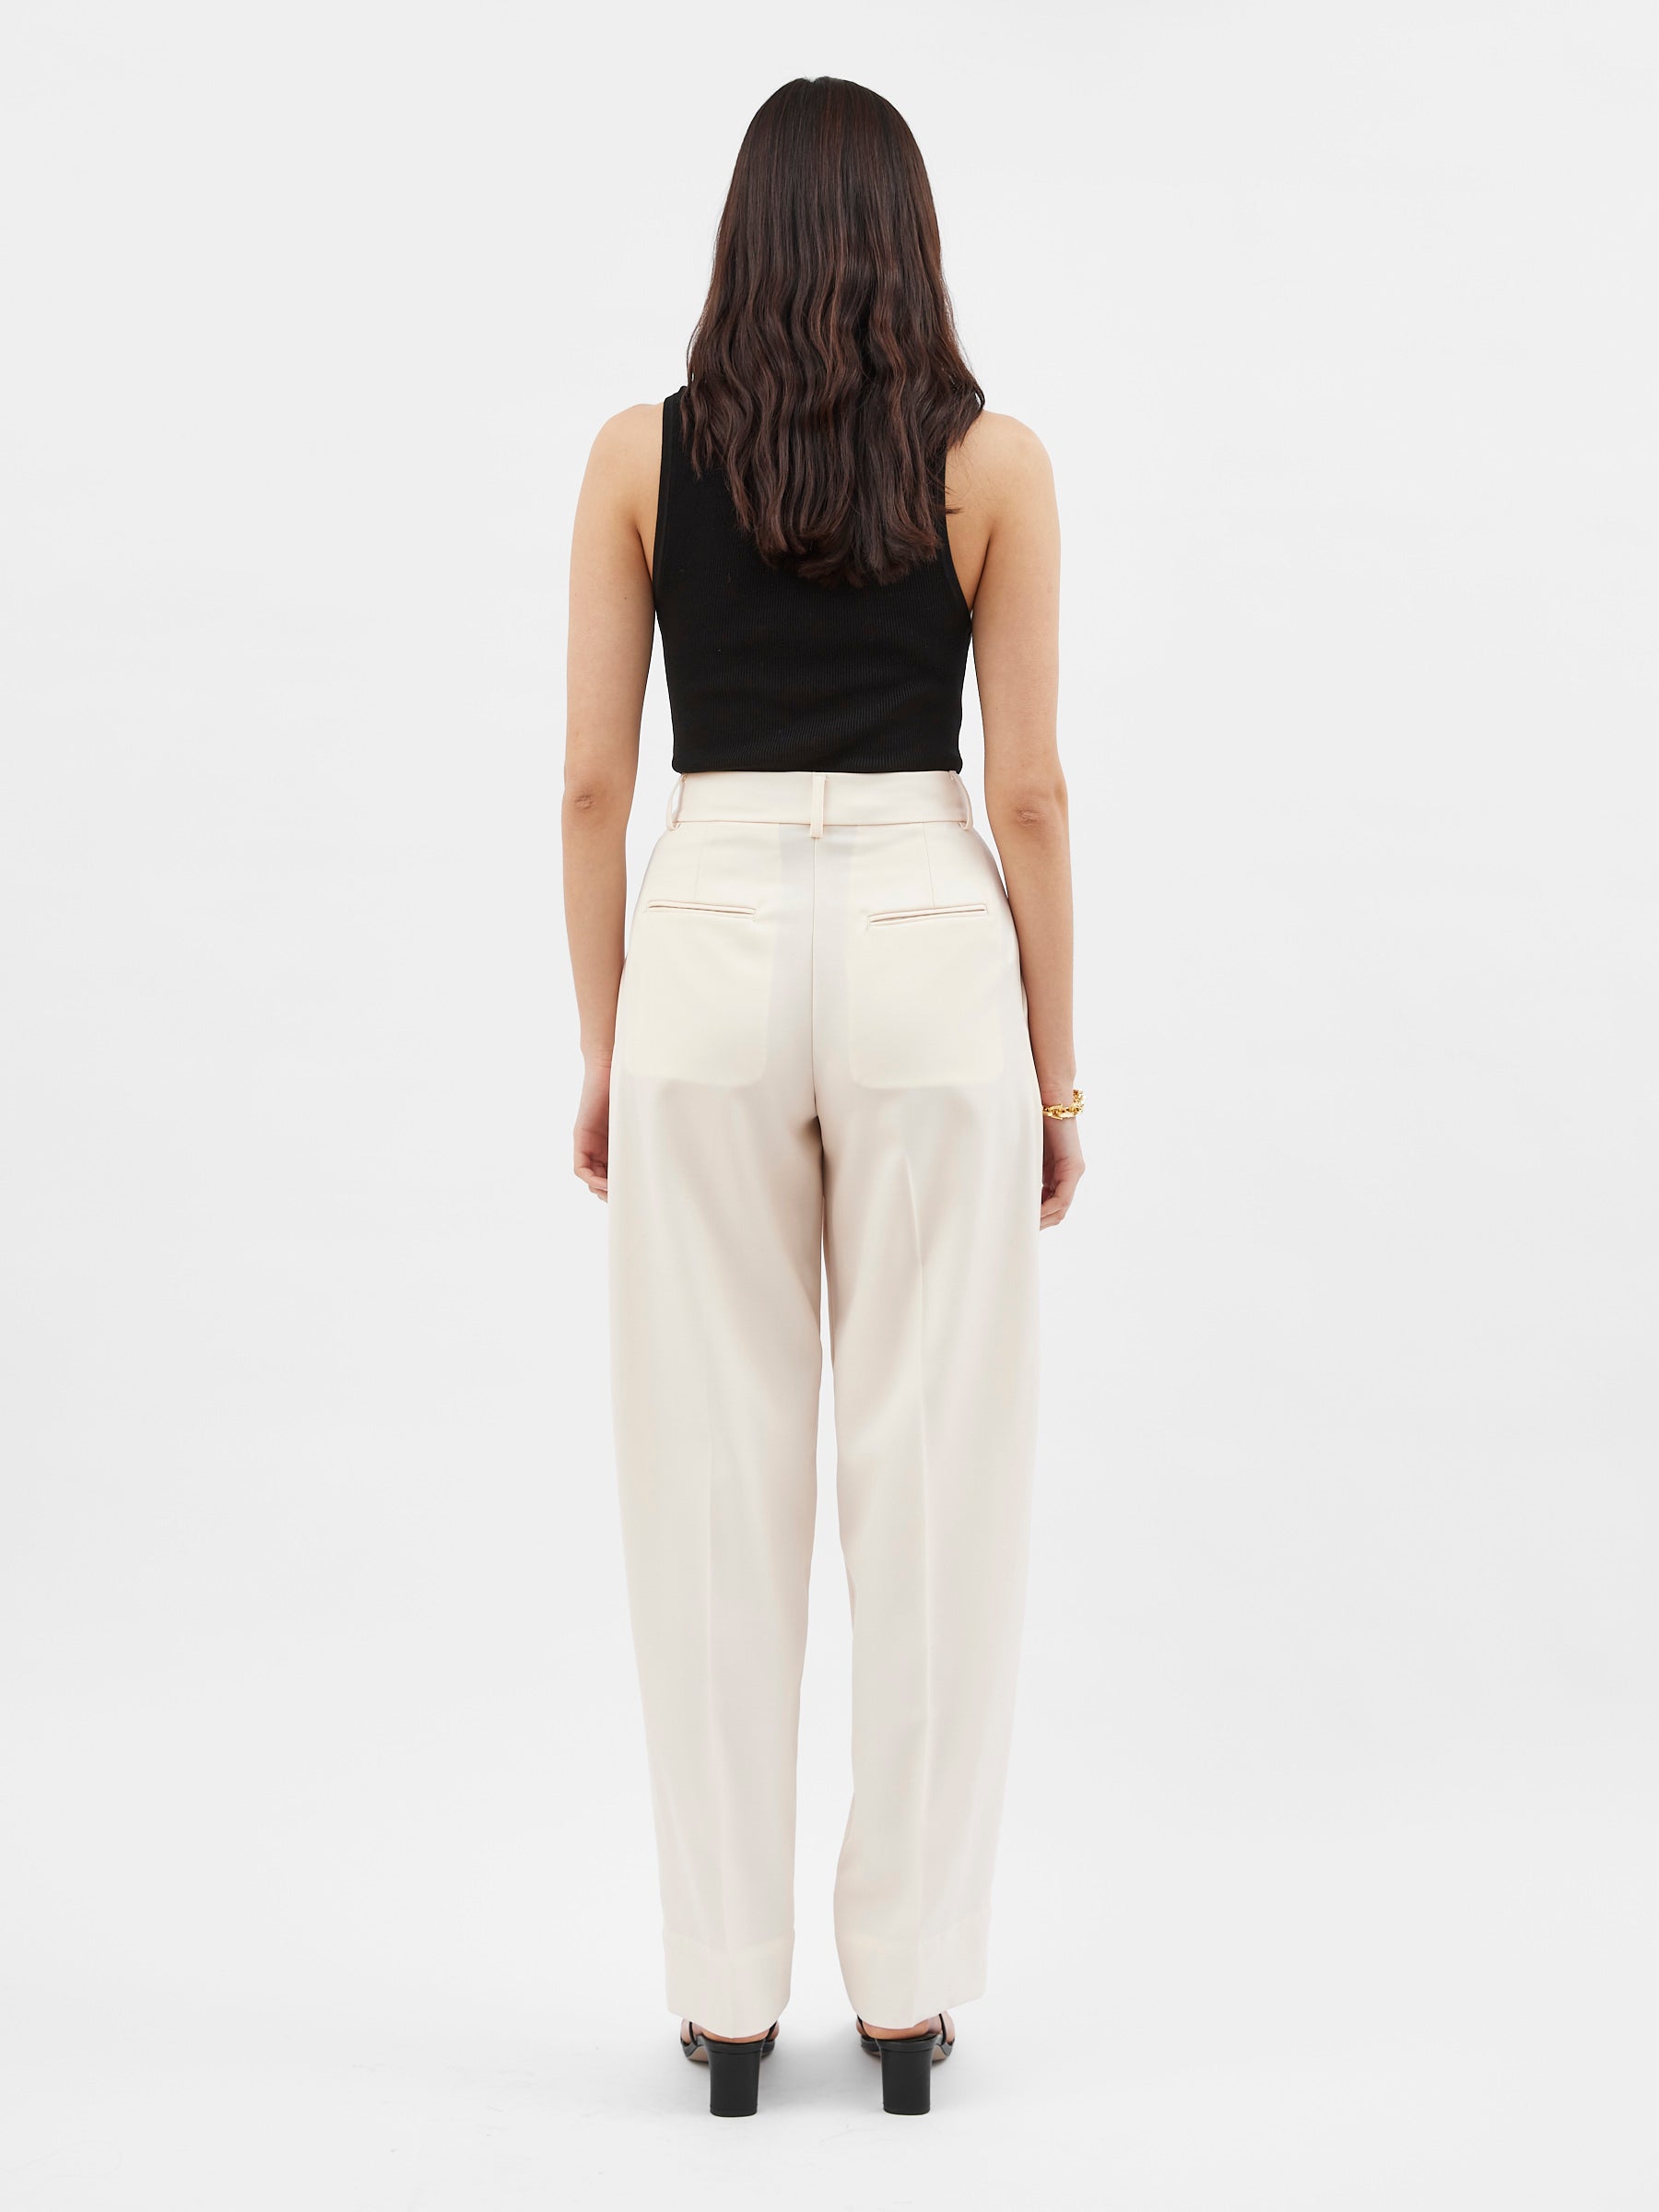 High Rise Trousers Women  Buy High Rise Trousers Women online in India